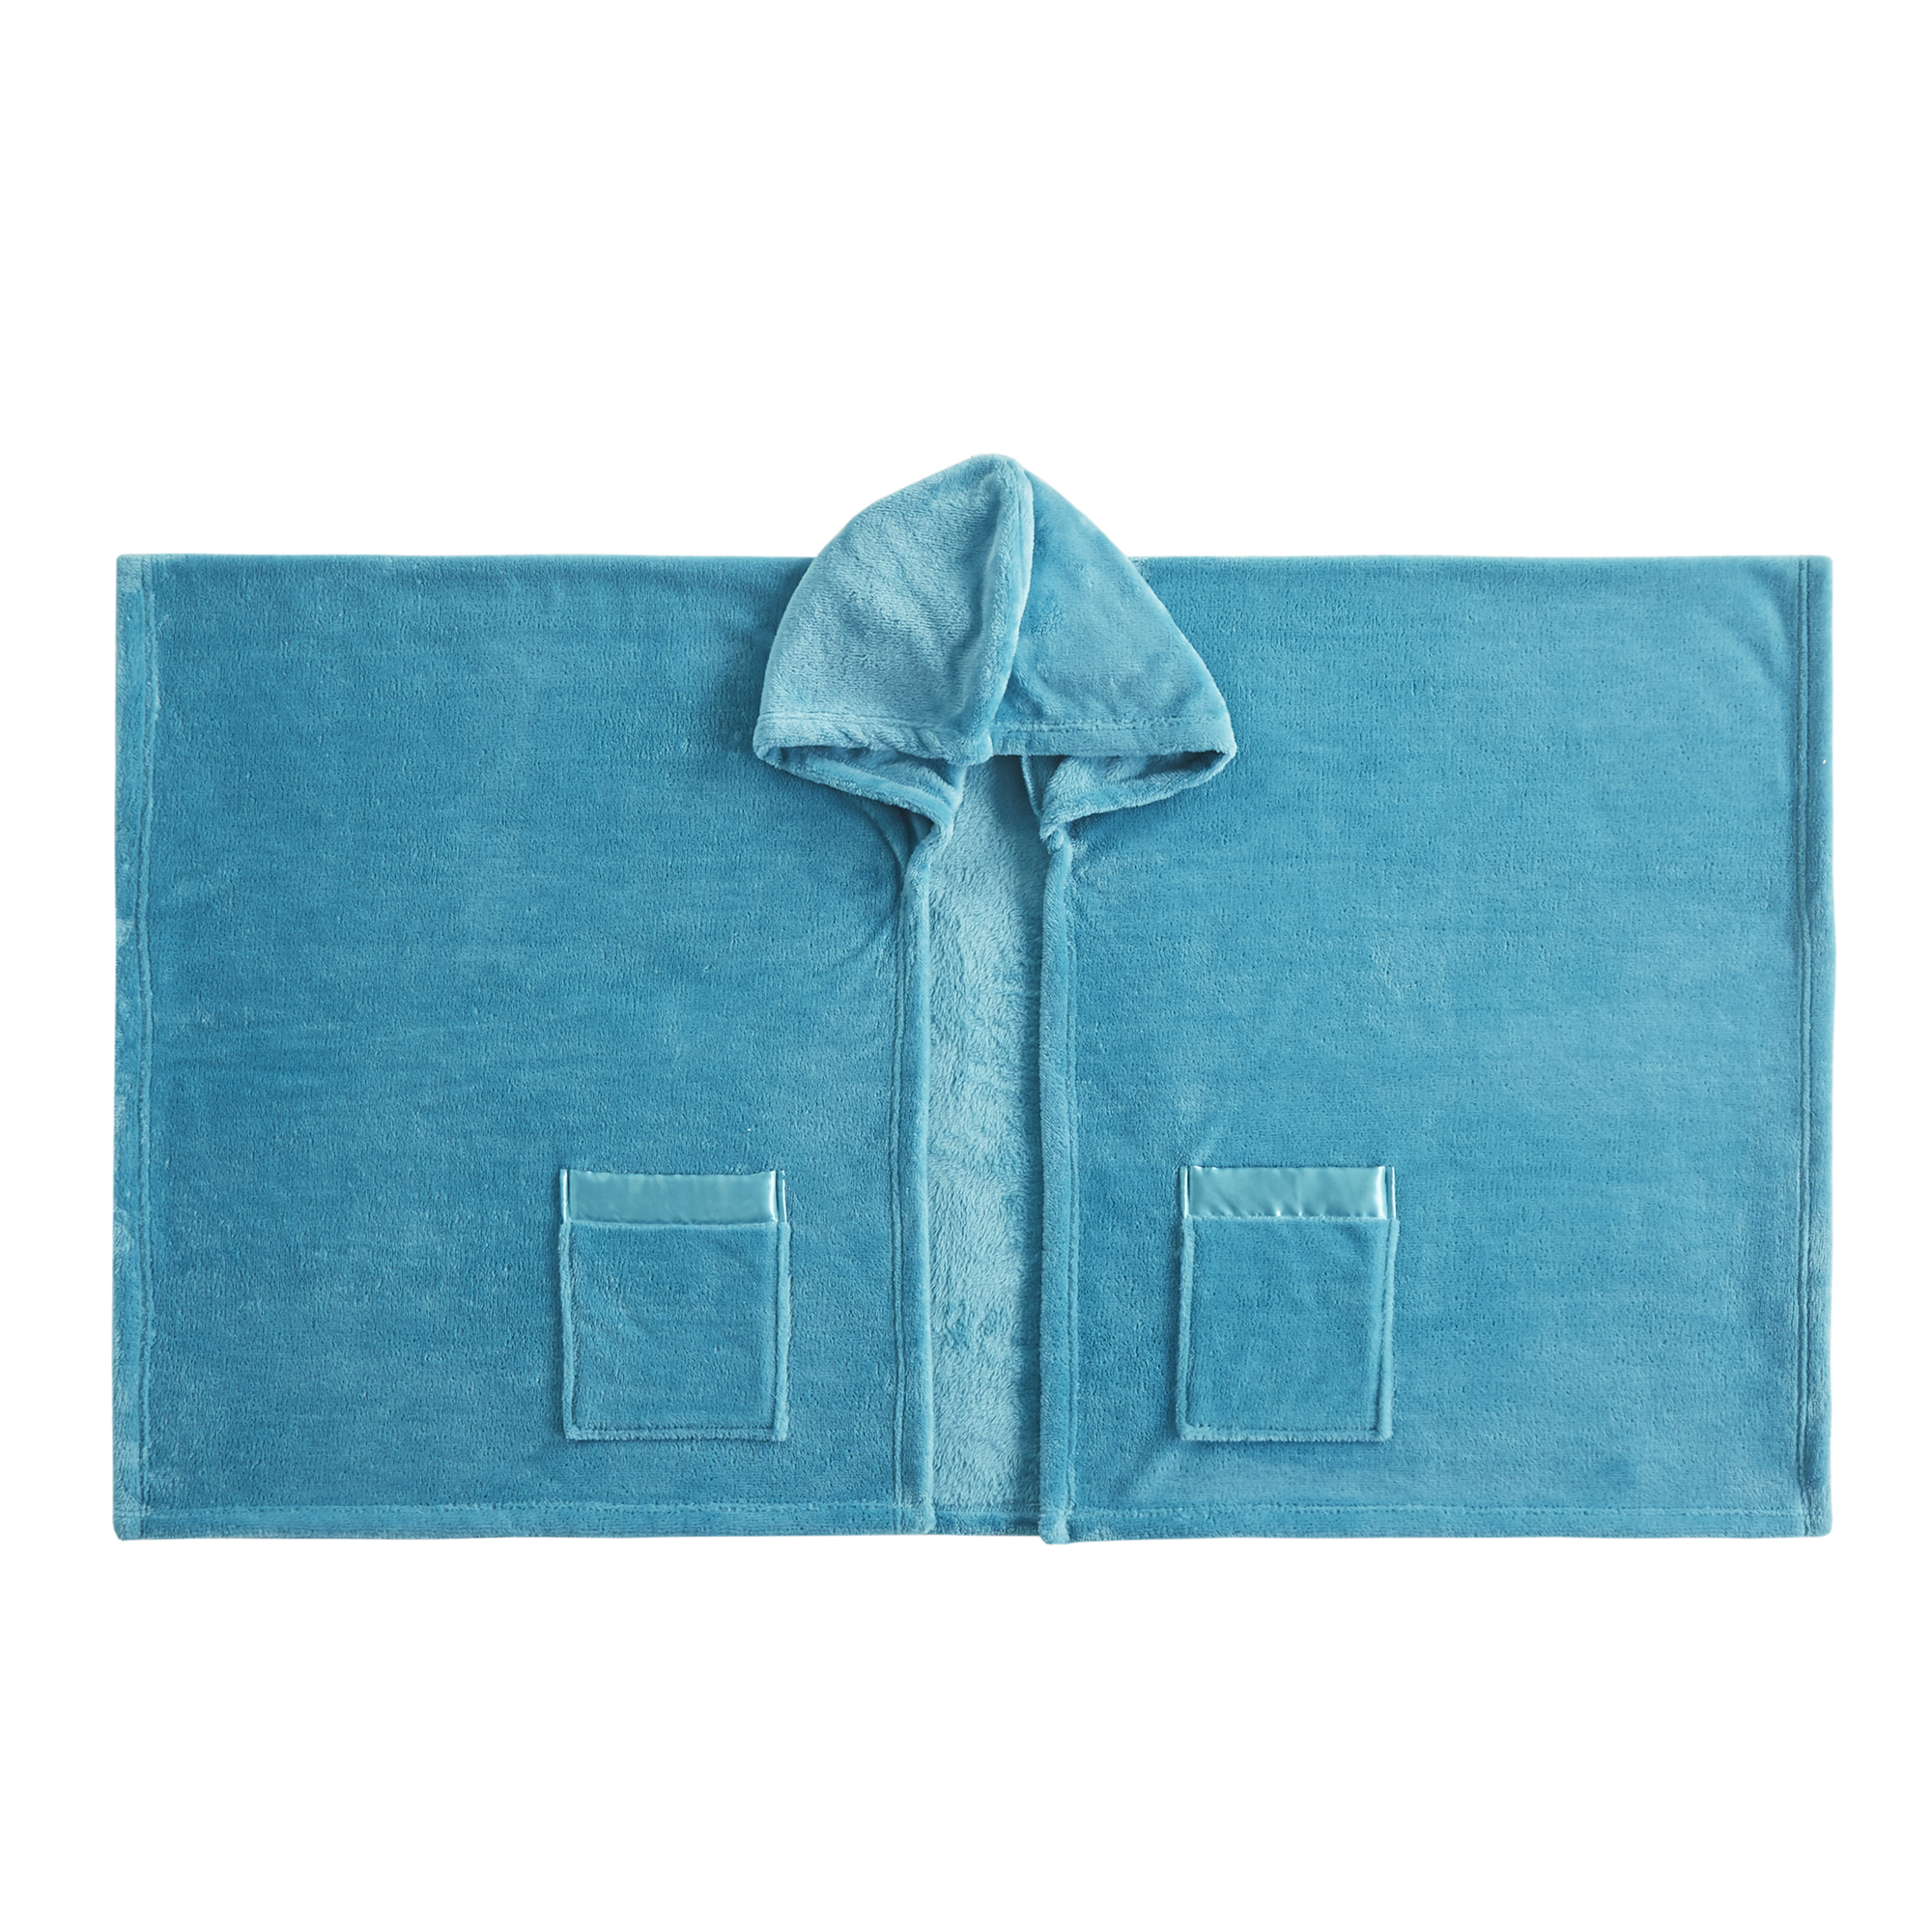 Comfort Spaces Teal Blue Polyester Plush Throw Blanket, Standard Throw - image 5 of 9